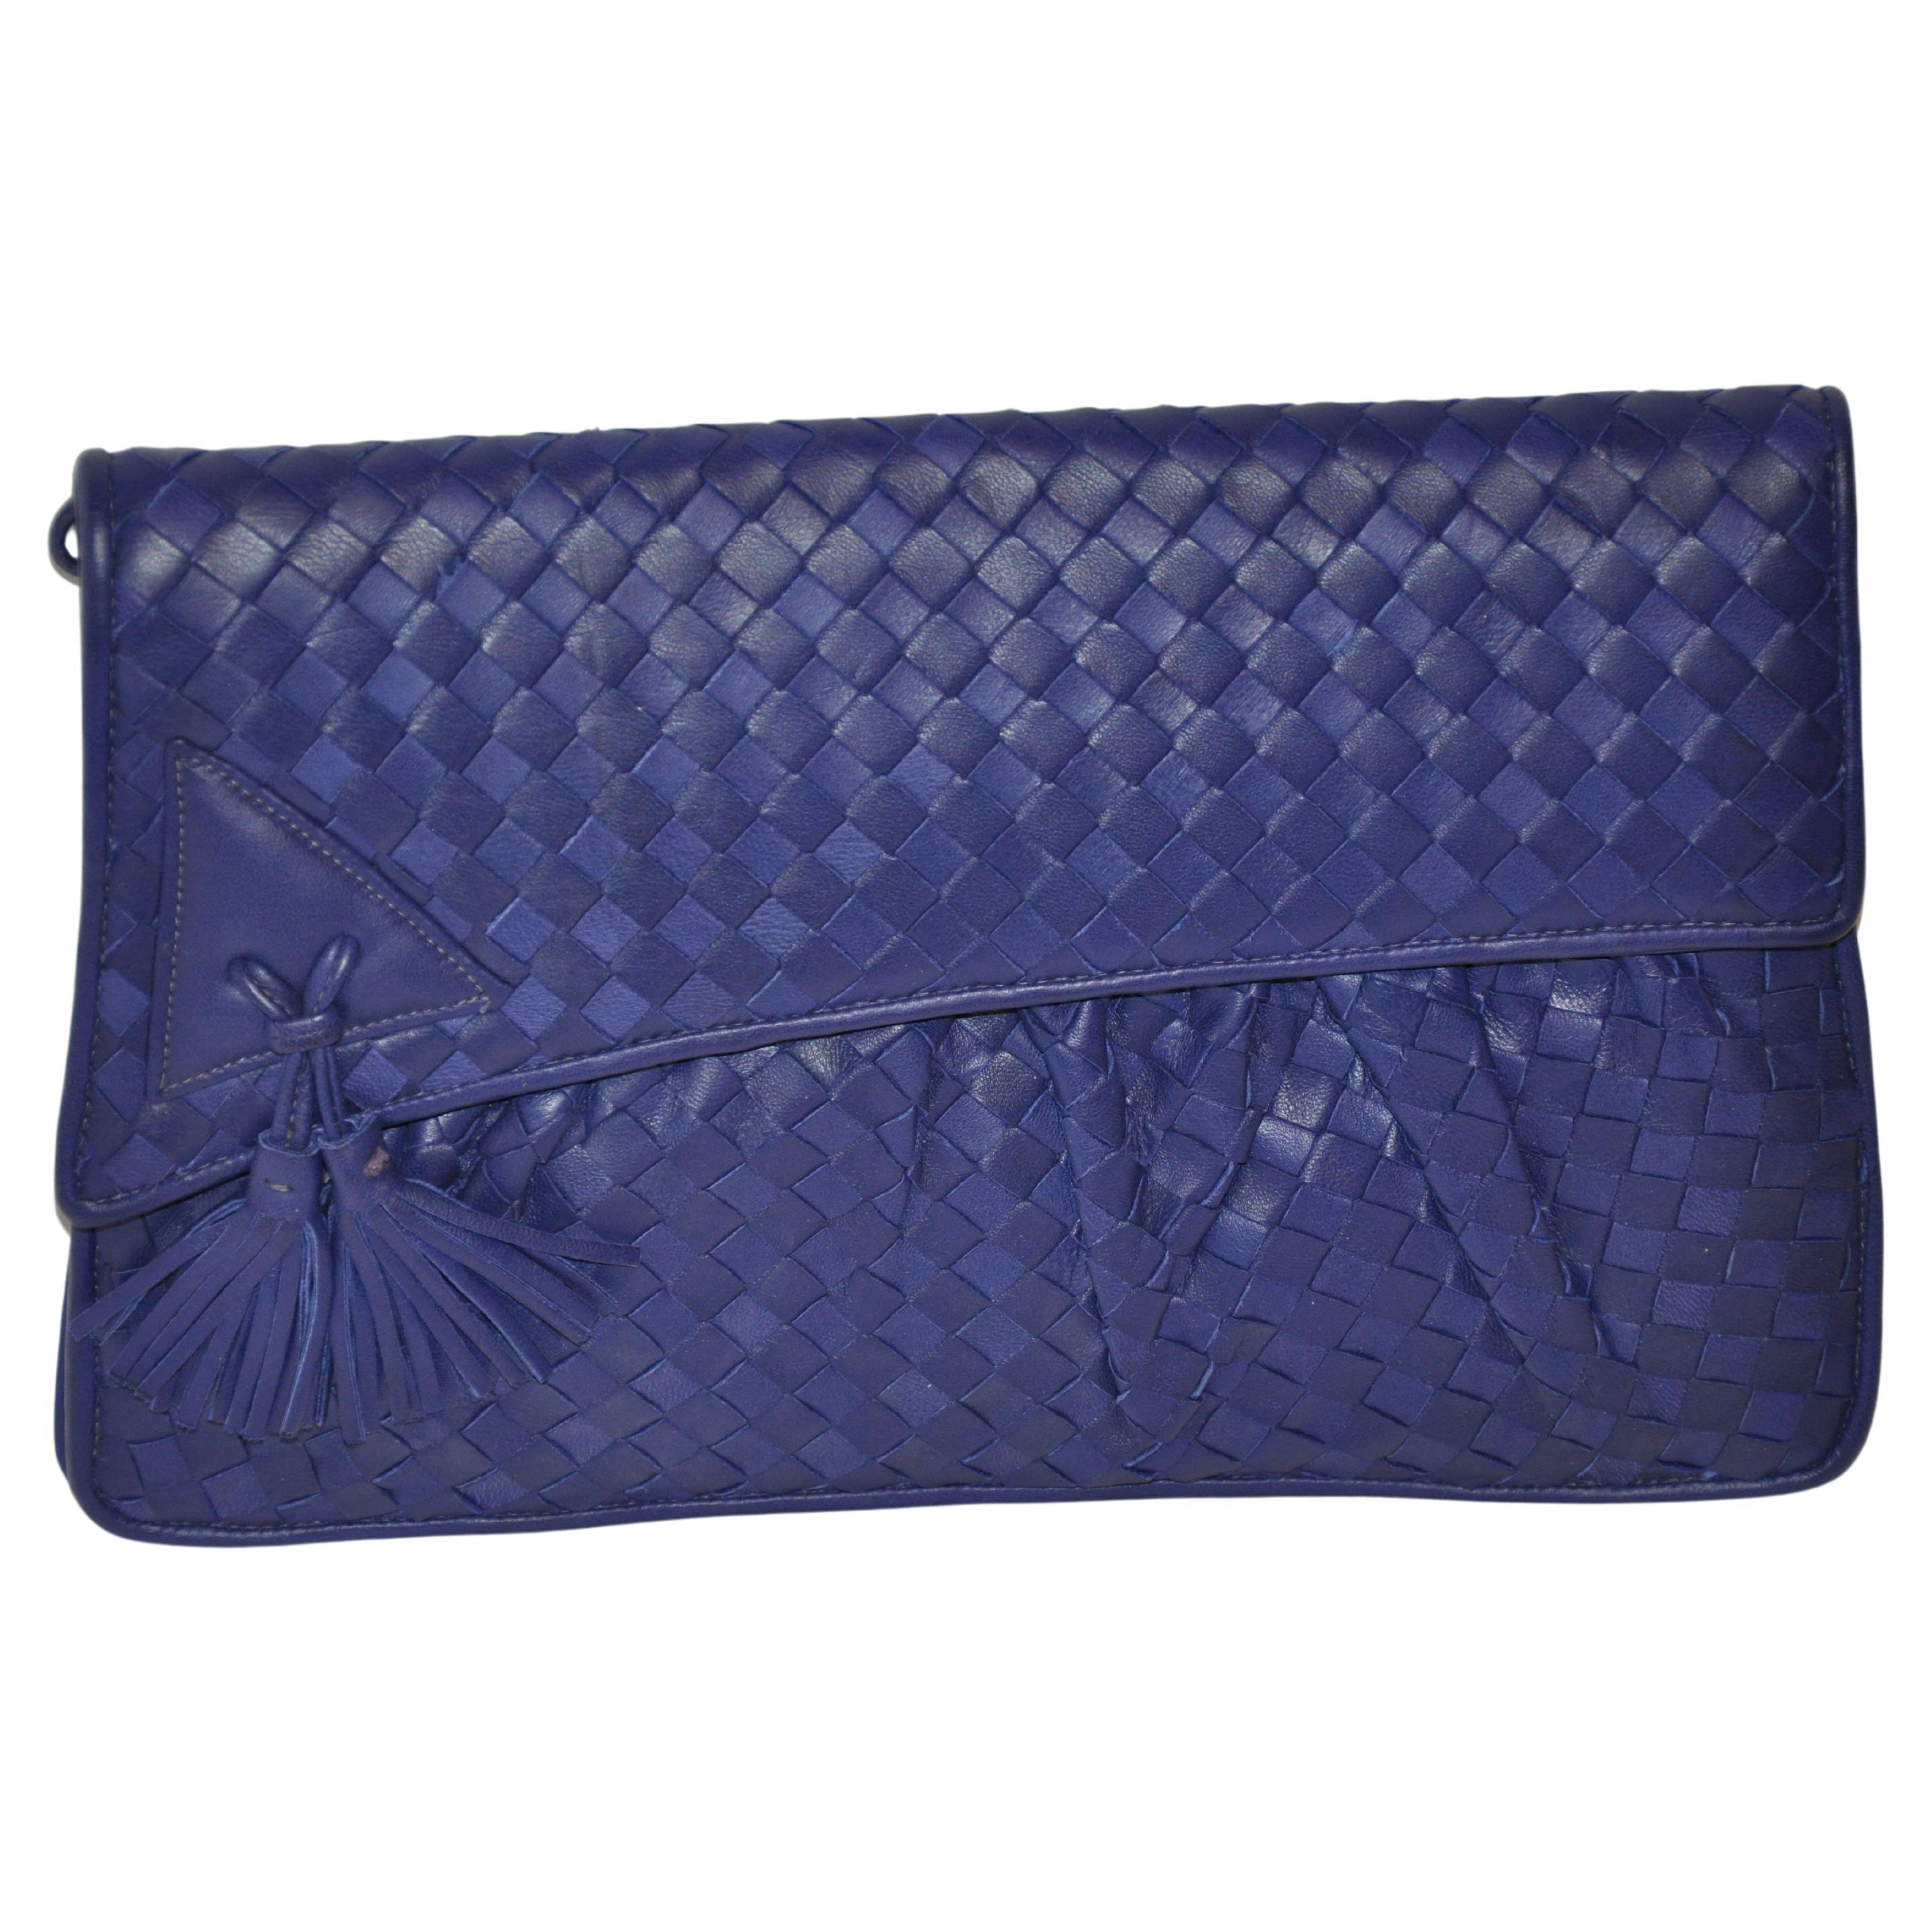 Myers Deep Lapis-Blue Soft Woven Lambskin Clutch with Optional Shoulder Straps